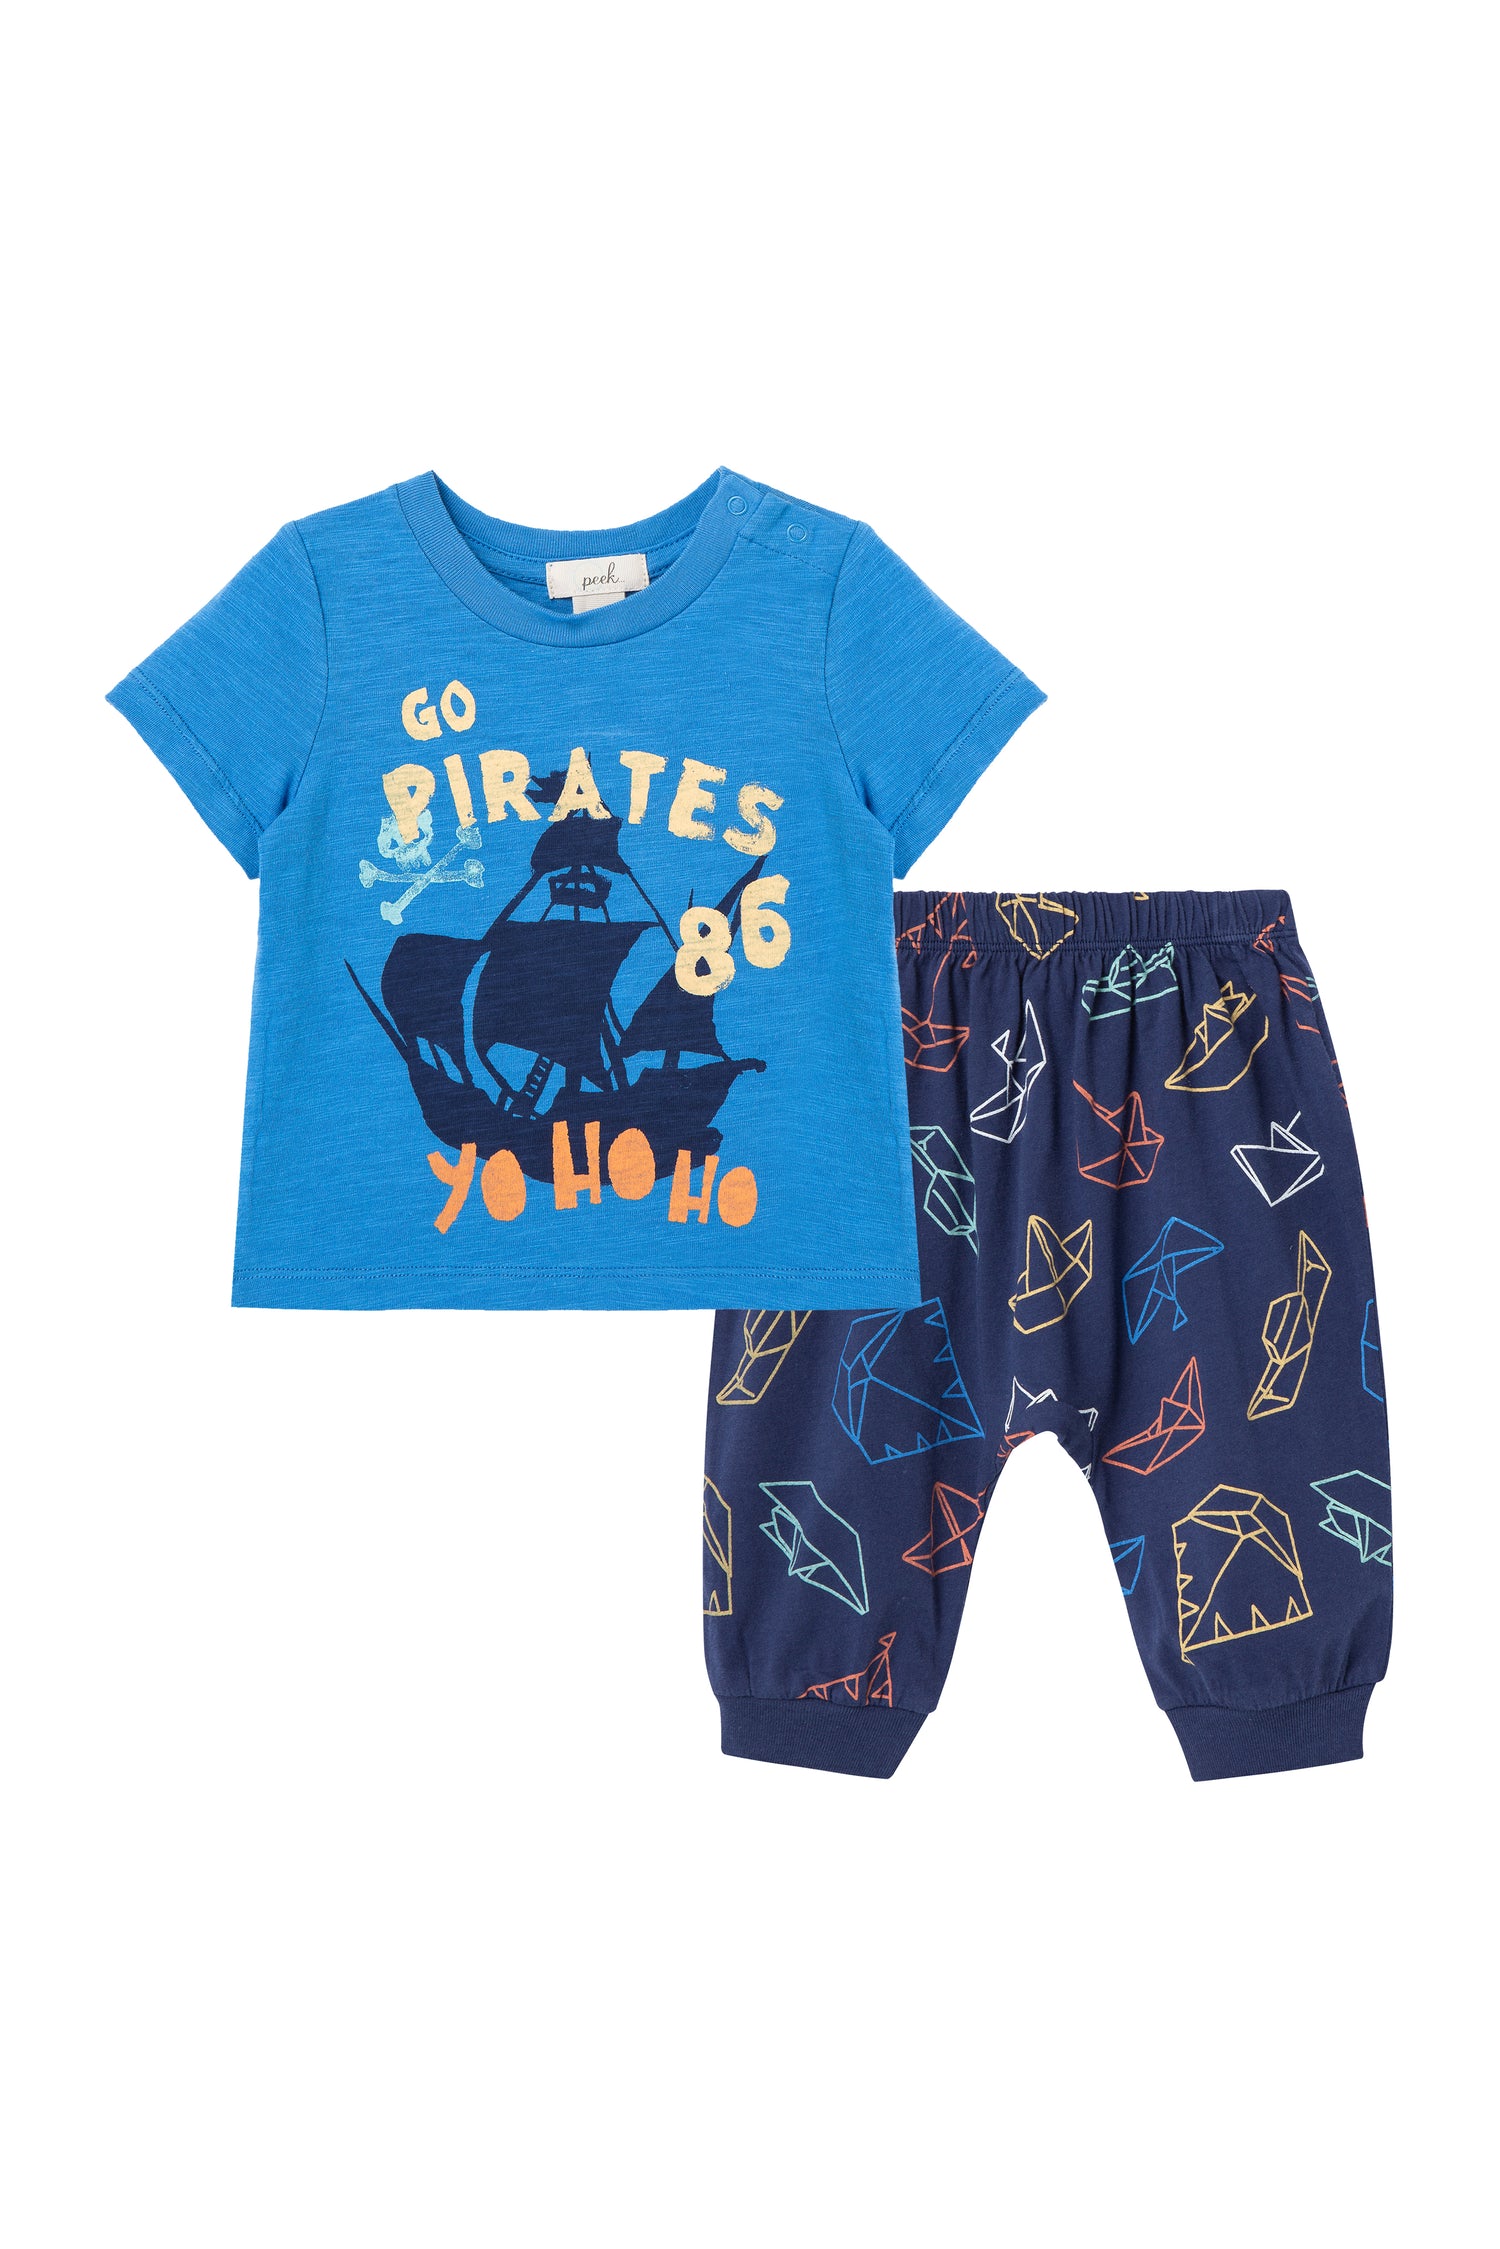 Front view of Blue pirate pant and shirt set with "go pirates" wording on shirt 